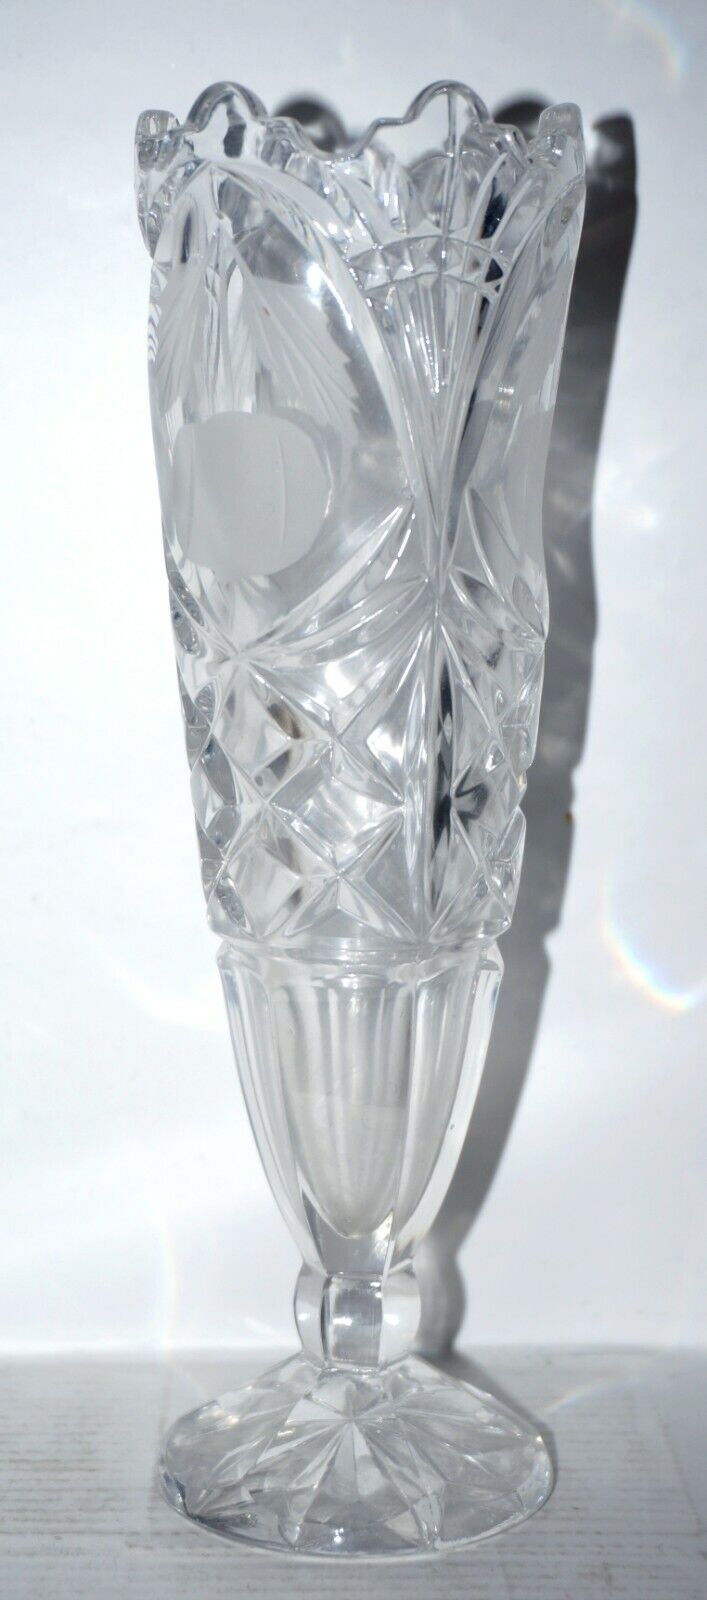 Great cut glass crystal trumpet vase clear 7.5 inches tall Etched